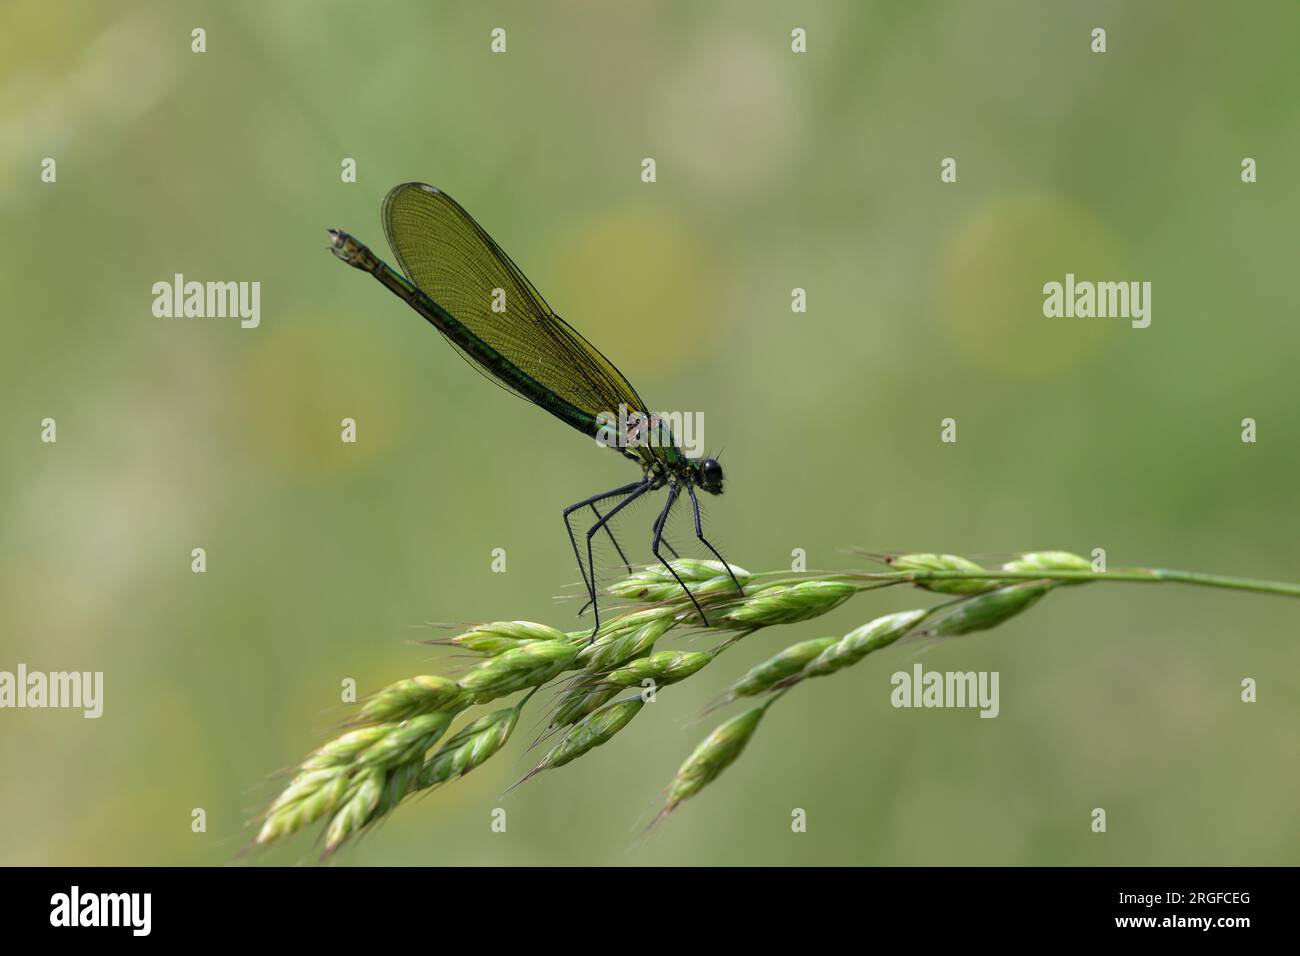 The banded demoiselle is a species of Eurasian damselfly belonging to the family Calopterygidae. It is found along slow-flowing streams and rivers. Stock Photo